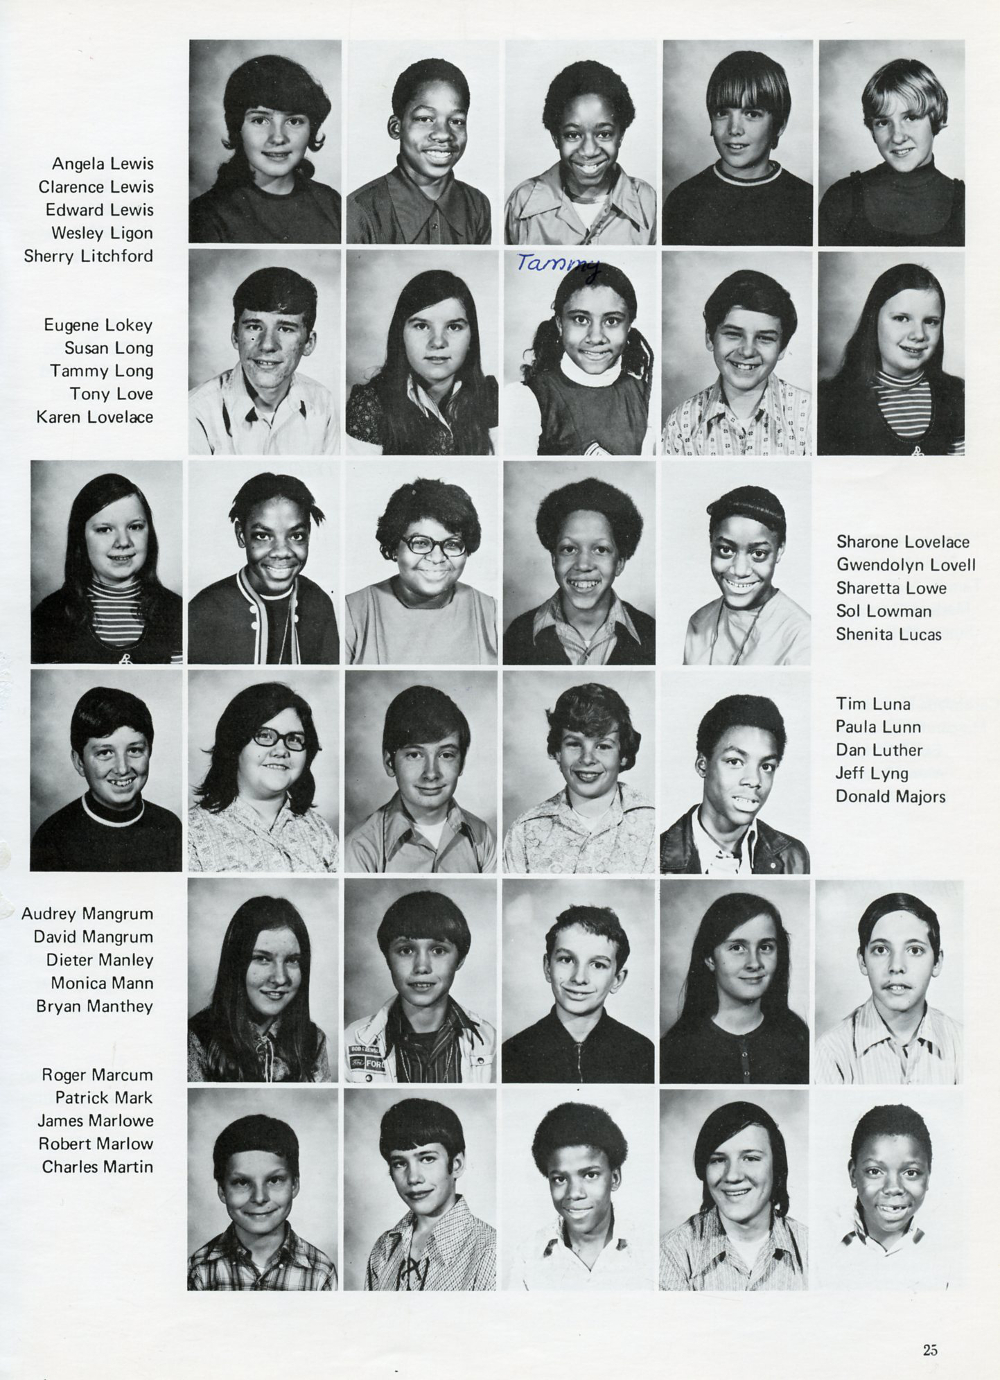 1973 Wharton Junior High School Yearbook and Students Page 25